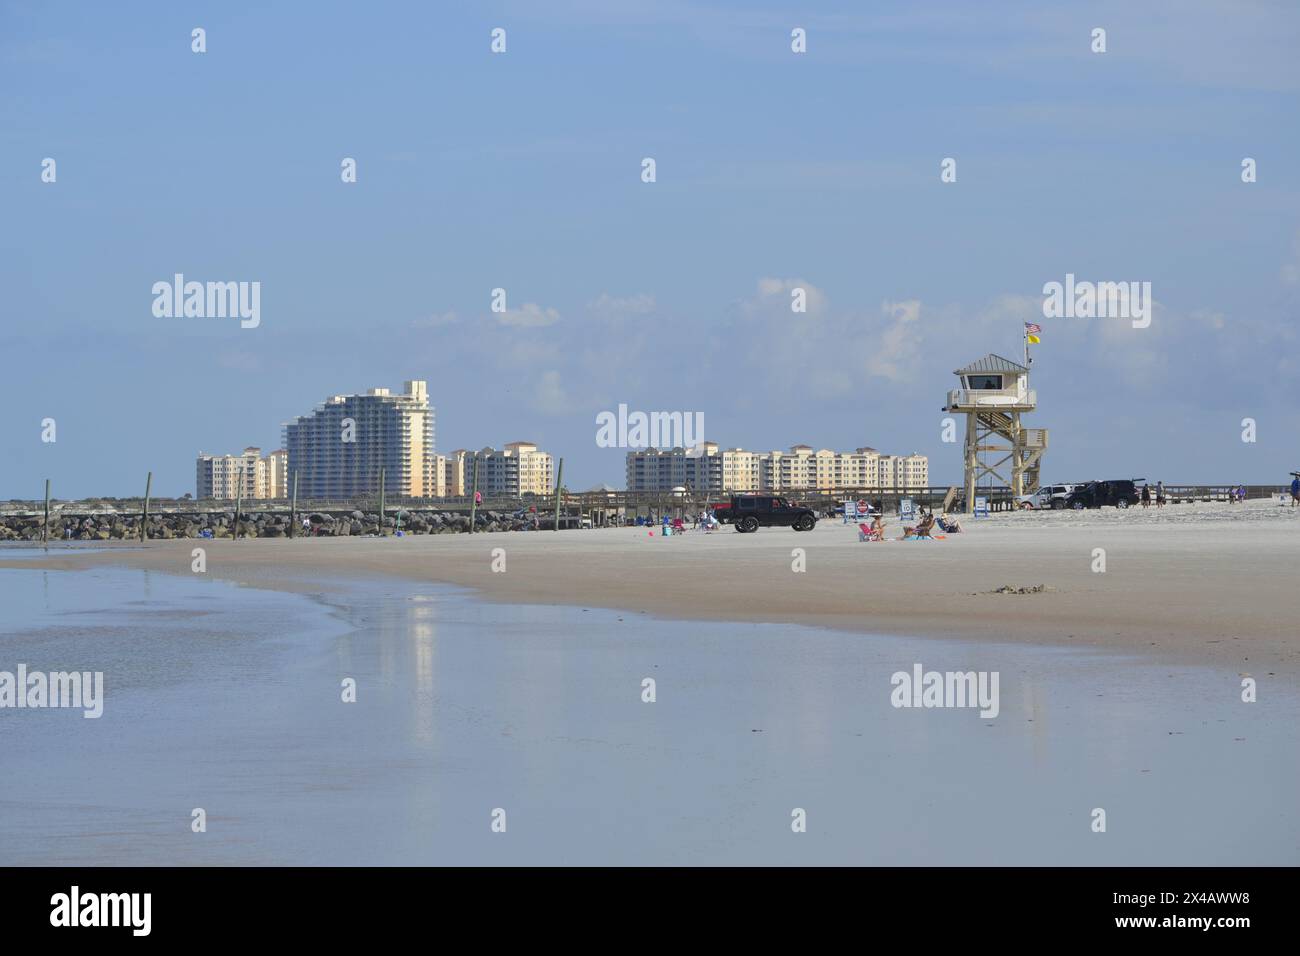 The backdrop of Ponce Inlet beach features a lifeguard station, parked cars, and people unwinding by the jetty, with the skyline of New Smyrna Beach. Stock Photo